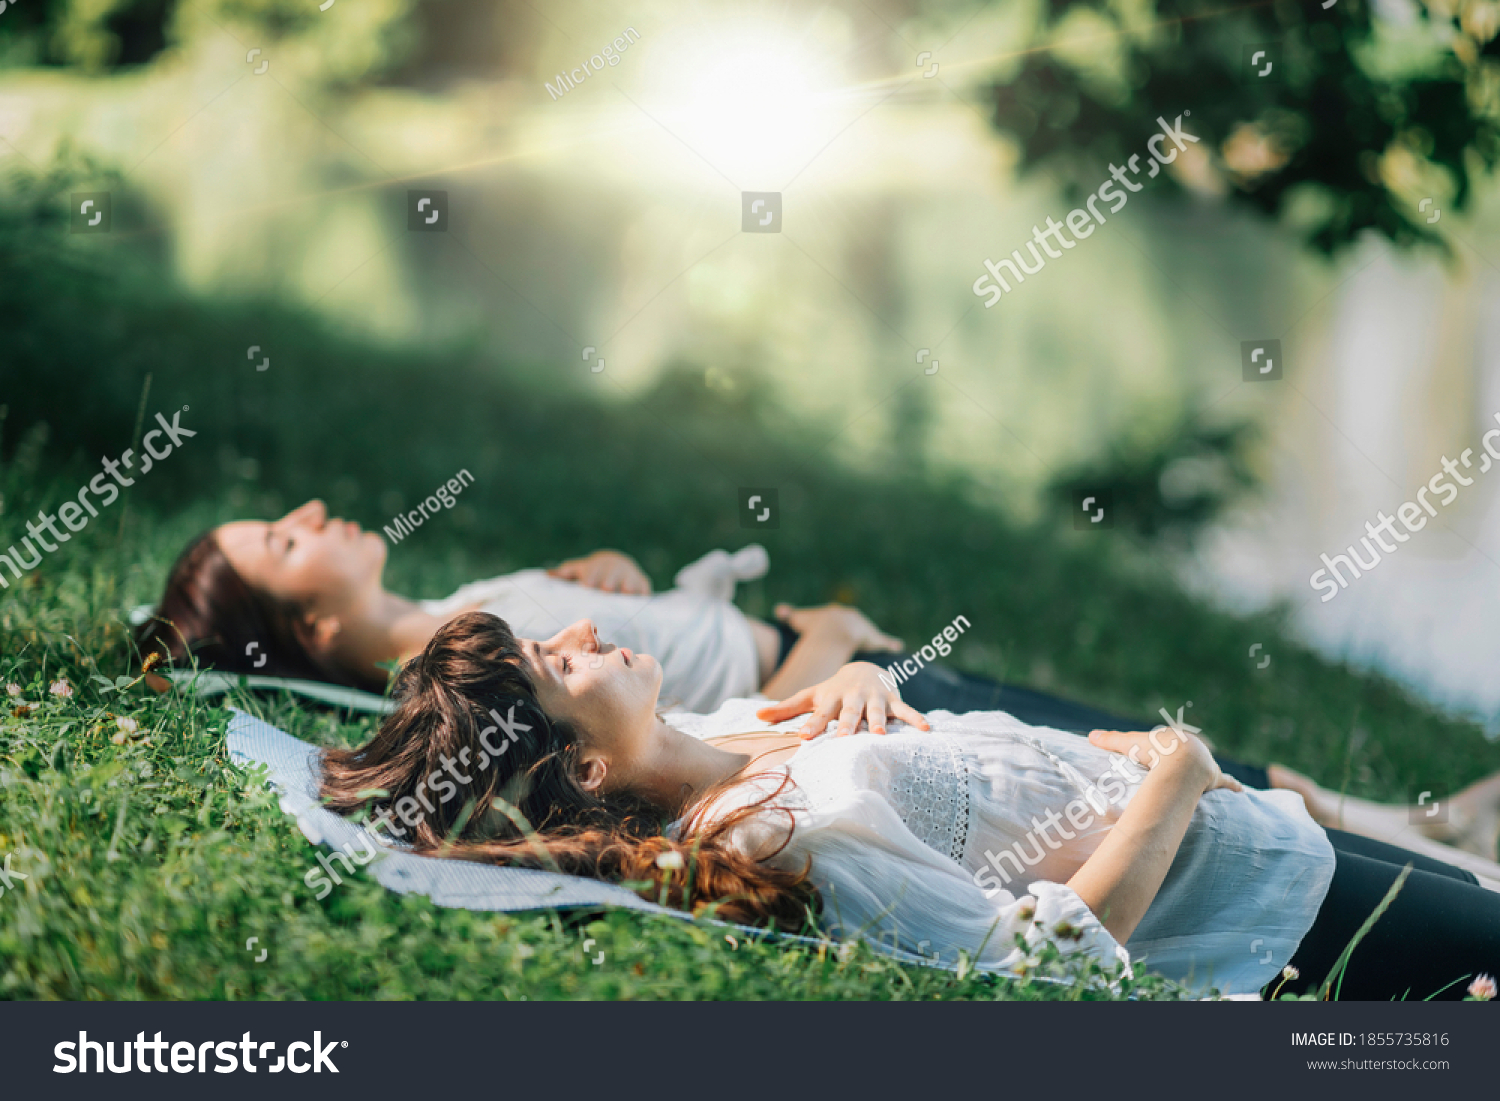 Meditation by the water. Two young women lying by the water and meditating #1855735816